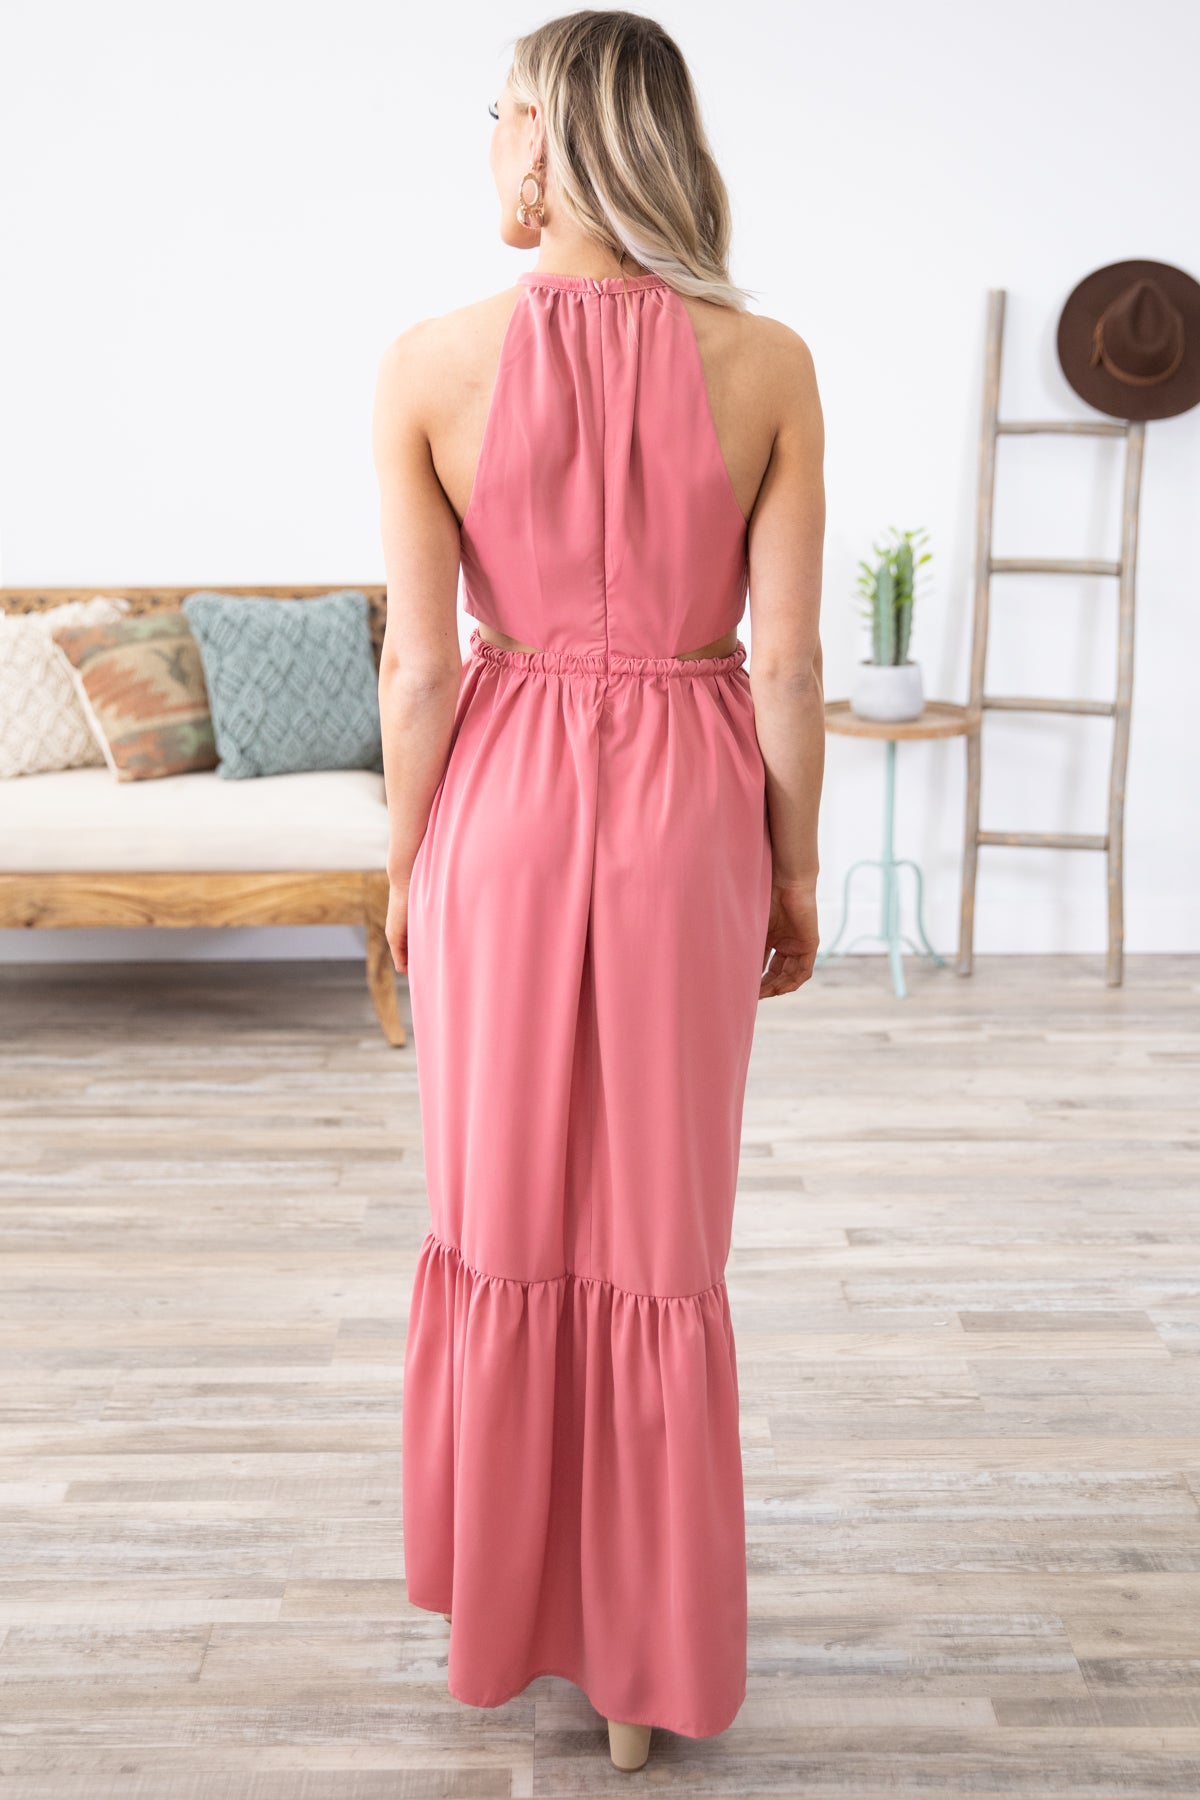 Coral Maxi Dress with Side Cutouts - Filly Flair